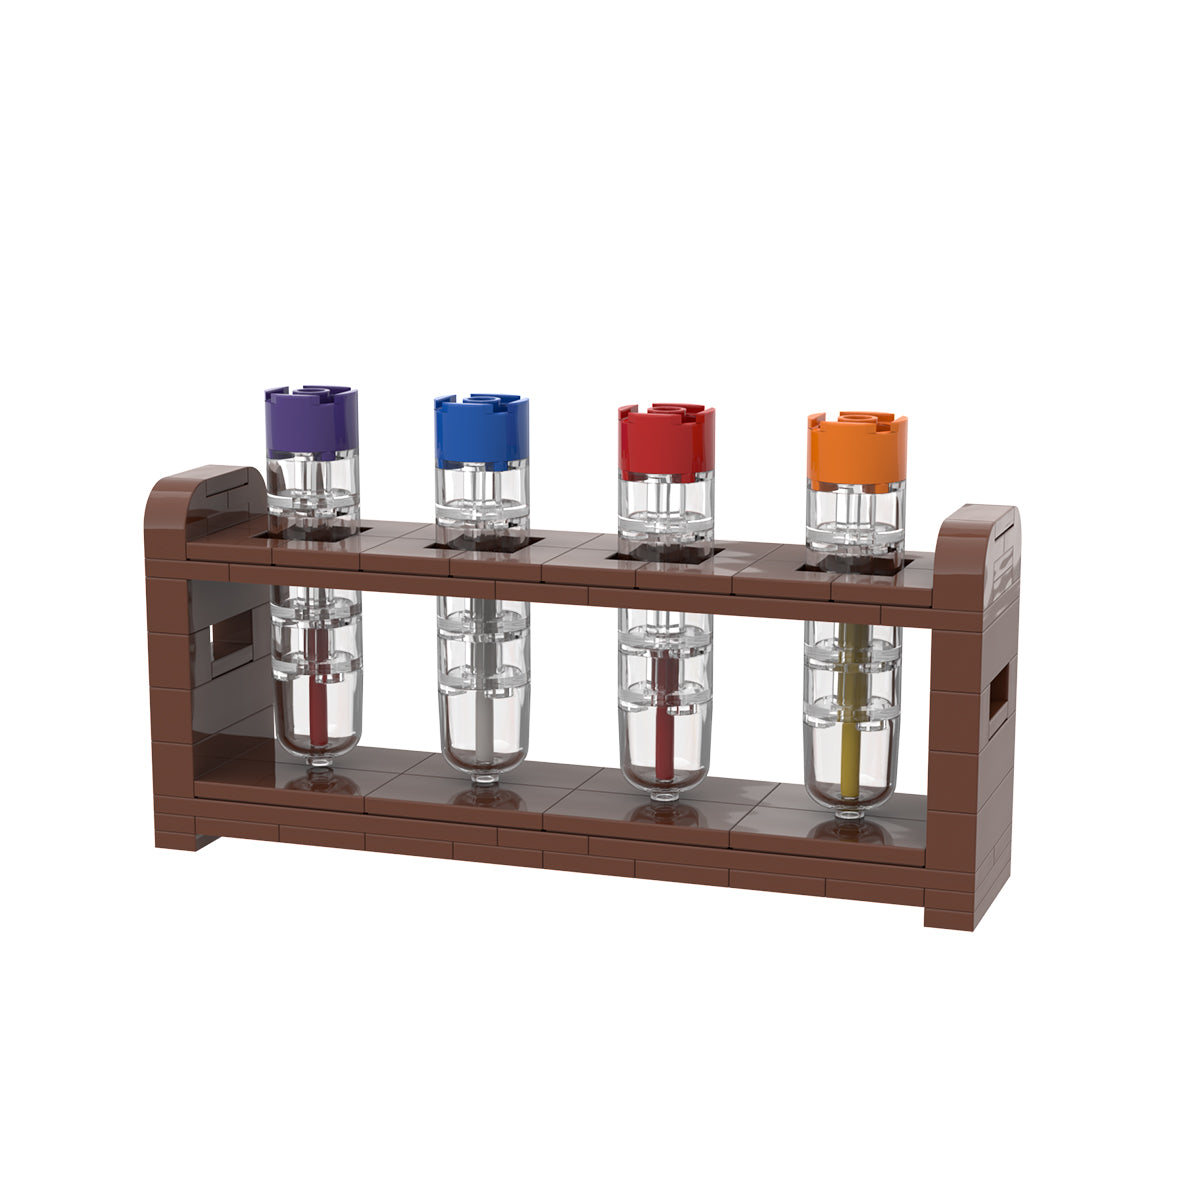 Science Themed Bar Glassware Set With Gift Box, Chemistry